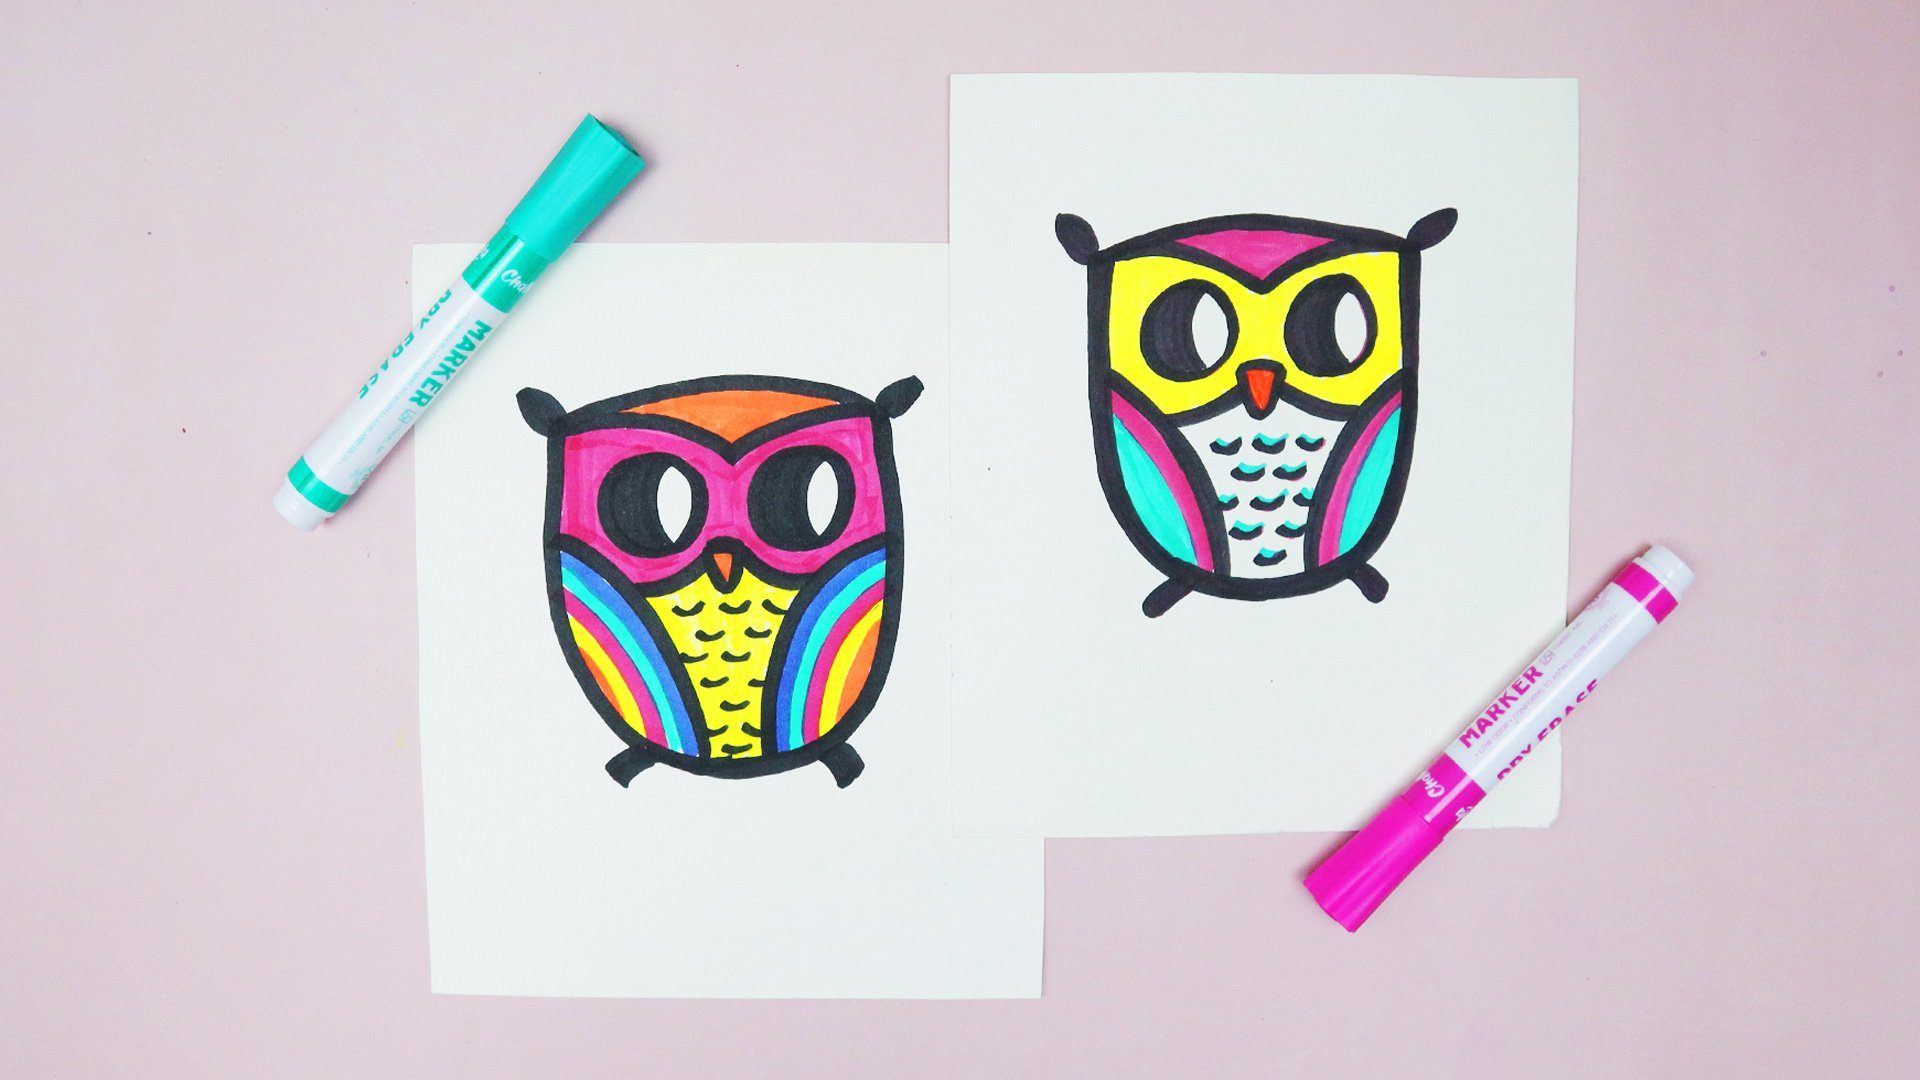 How To Draw An Owl Step By Step Art Tutorial On How To Draw Owls  Background, Pictures Of Owls To Draw, Owl, Bird Background Image And  Wallpaper for Free Download